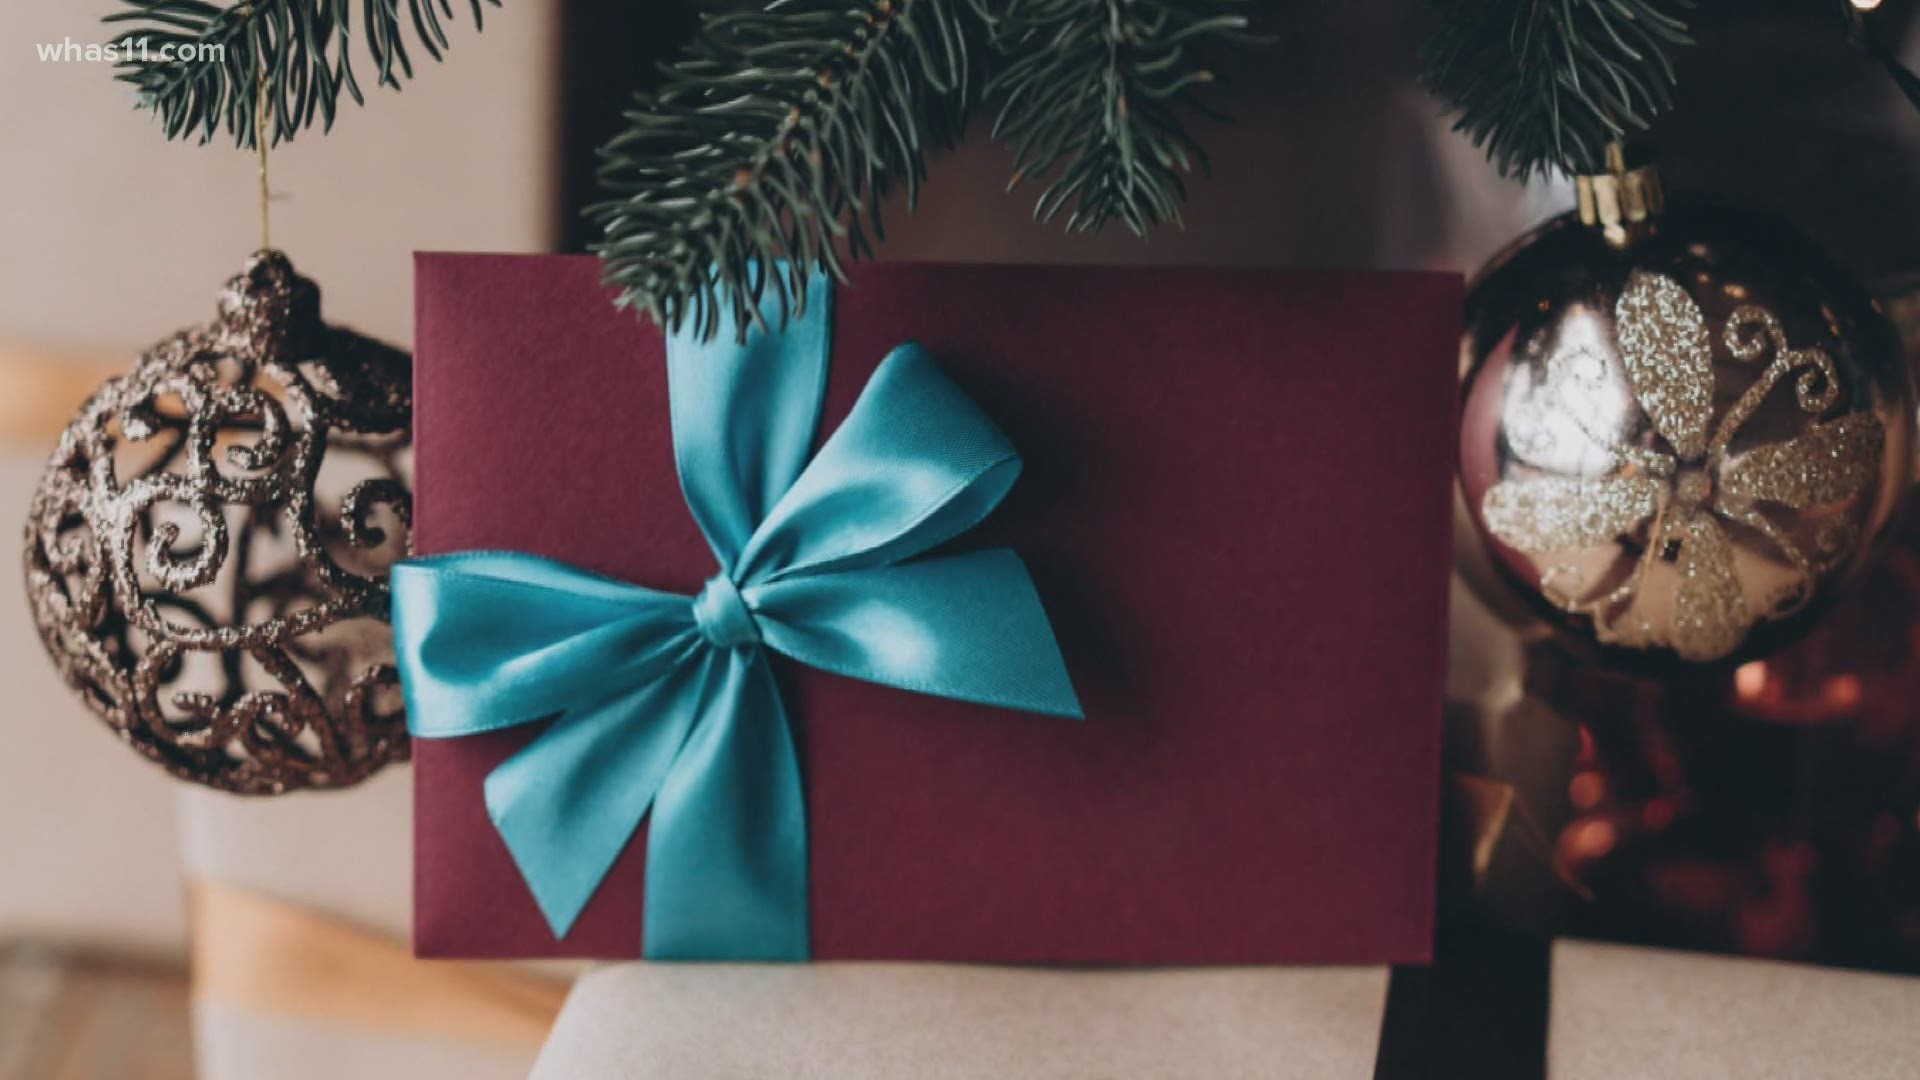 Don't get scammed this holiday season with these tips.